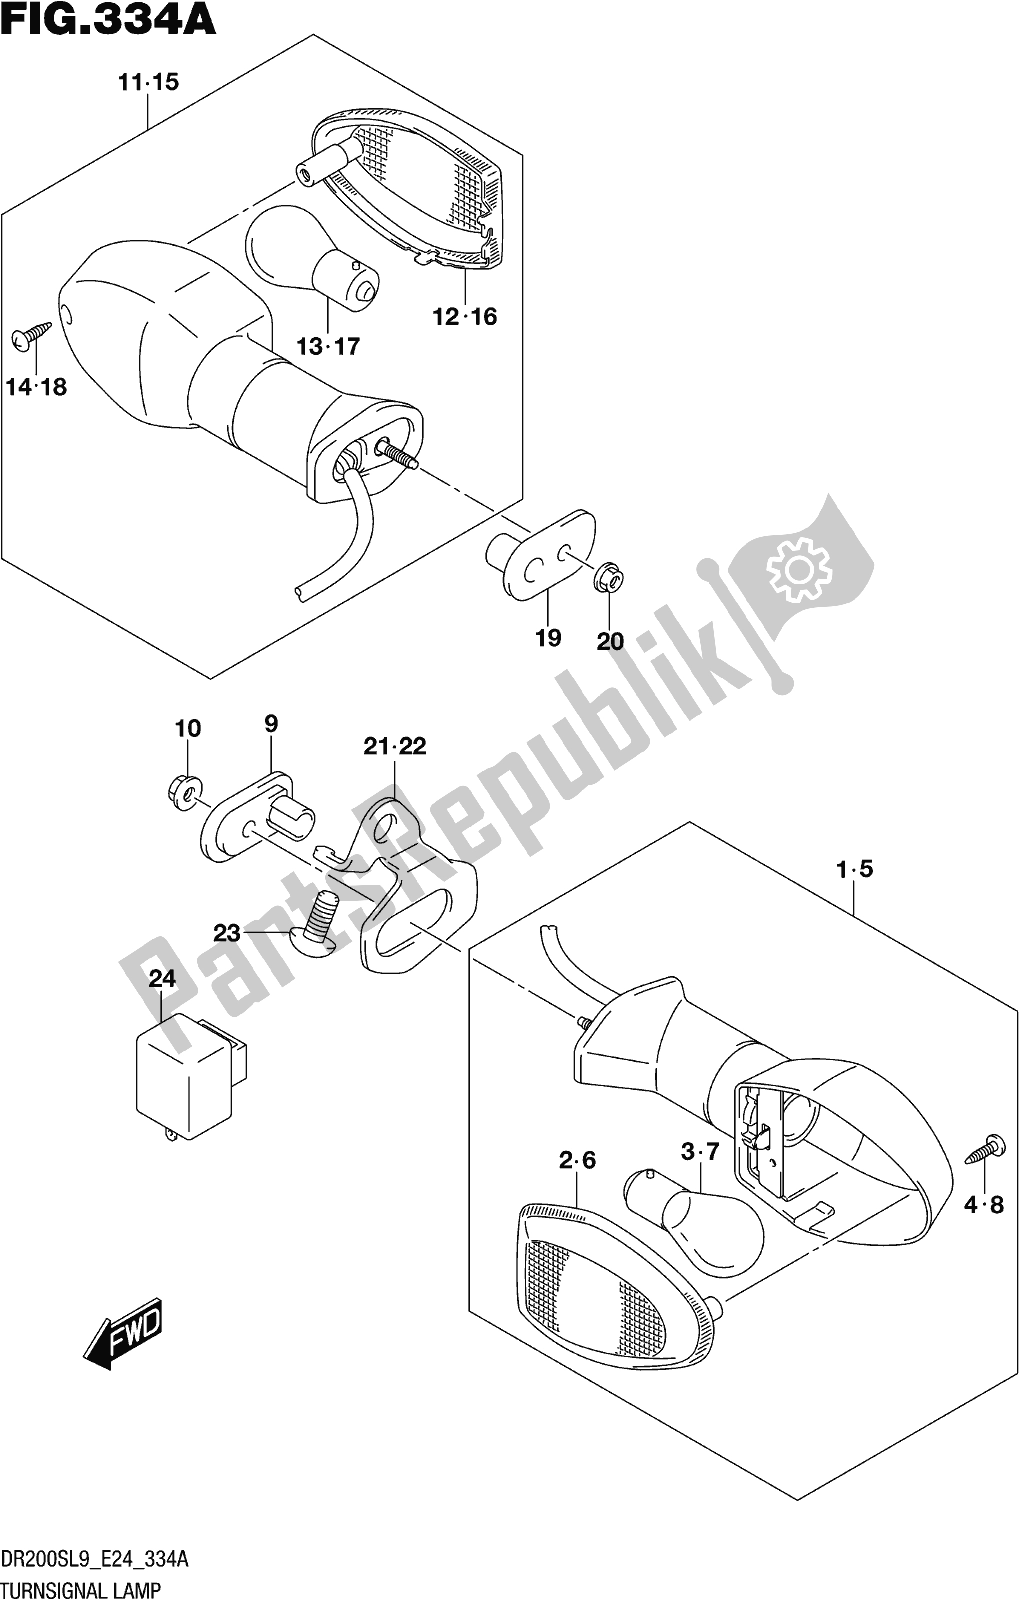 All parts for the Fig. 334a Turnsignal Lamp of the Suzuki DR 200S 2019